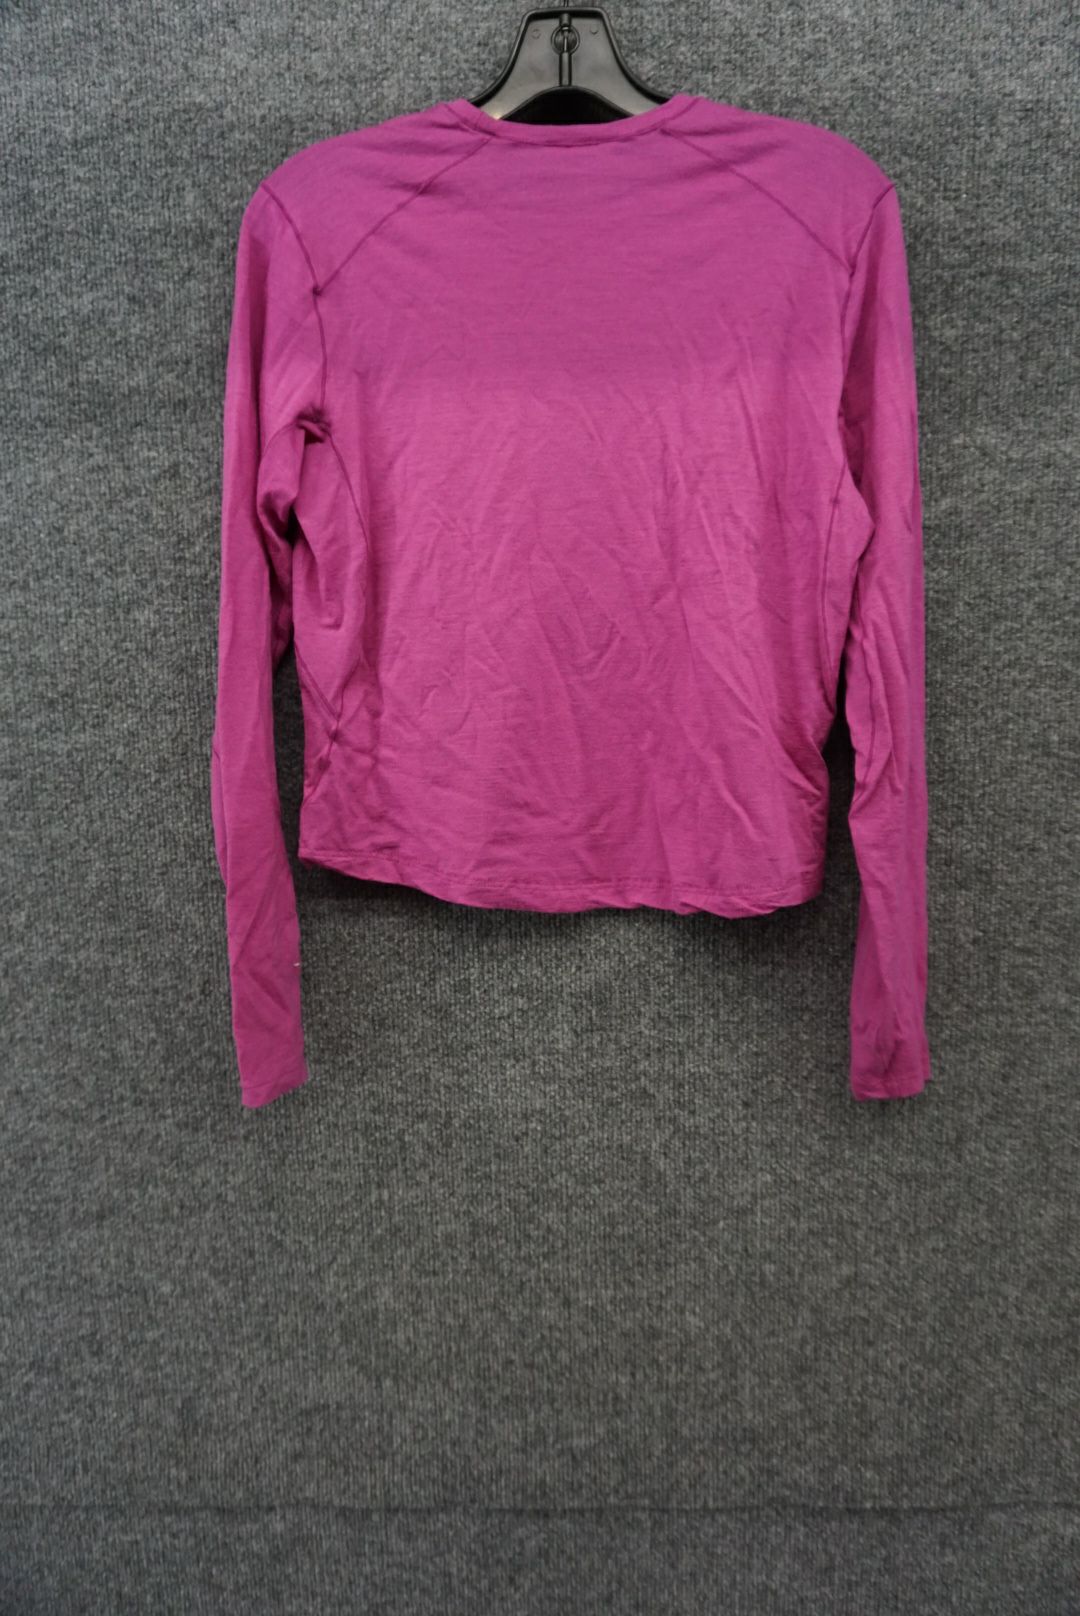 REI Size Y Large Youth Base Layer Top